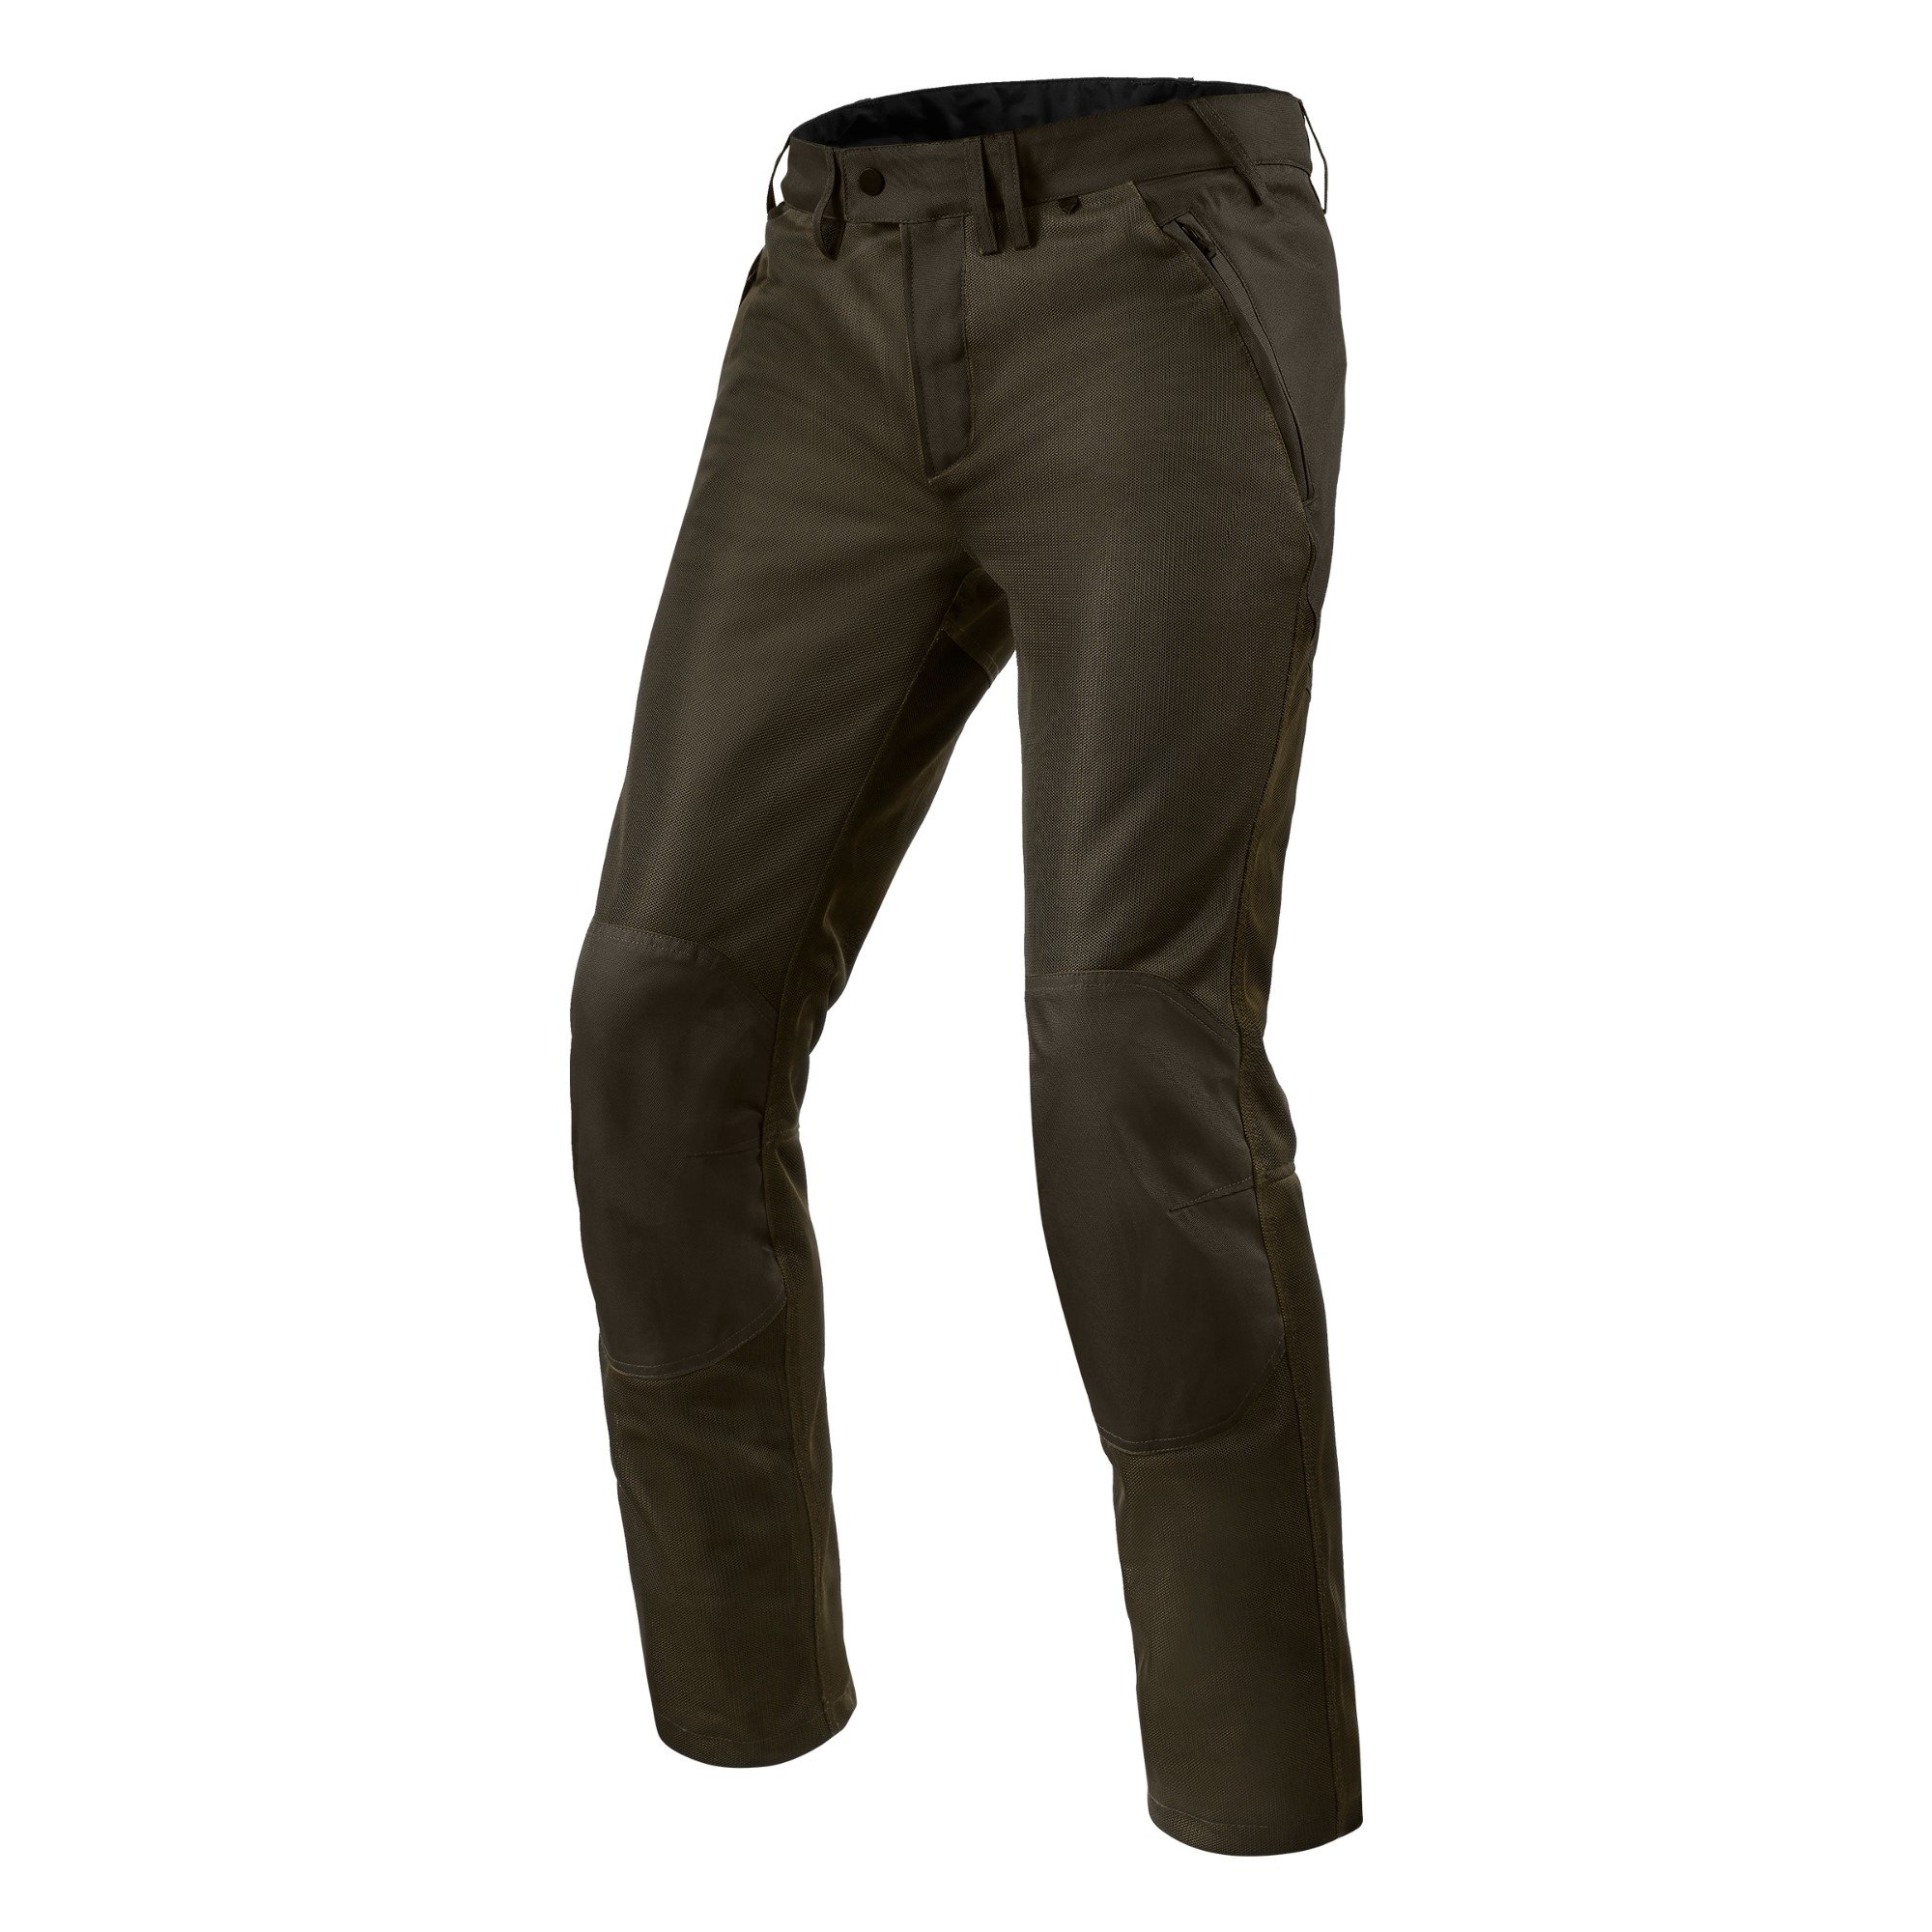 Image of REV'IT! Pants Eclipse 2 Black Olive Long Motorcycle Pants Size 4XL ID 8700001368919